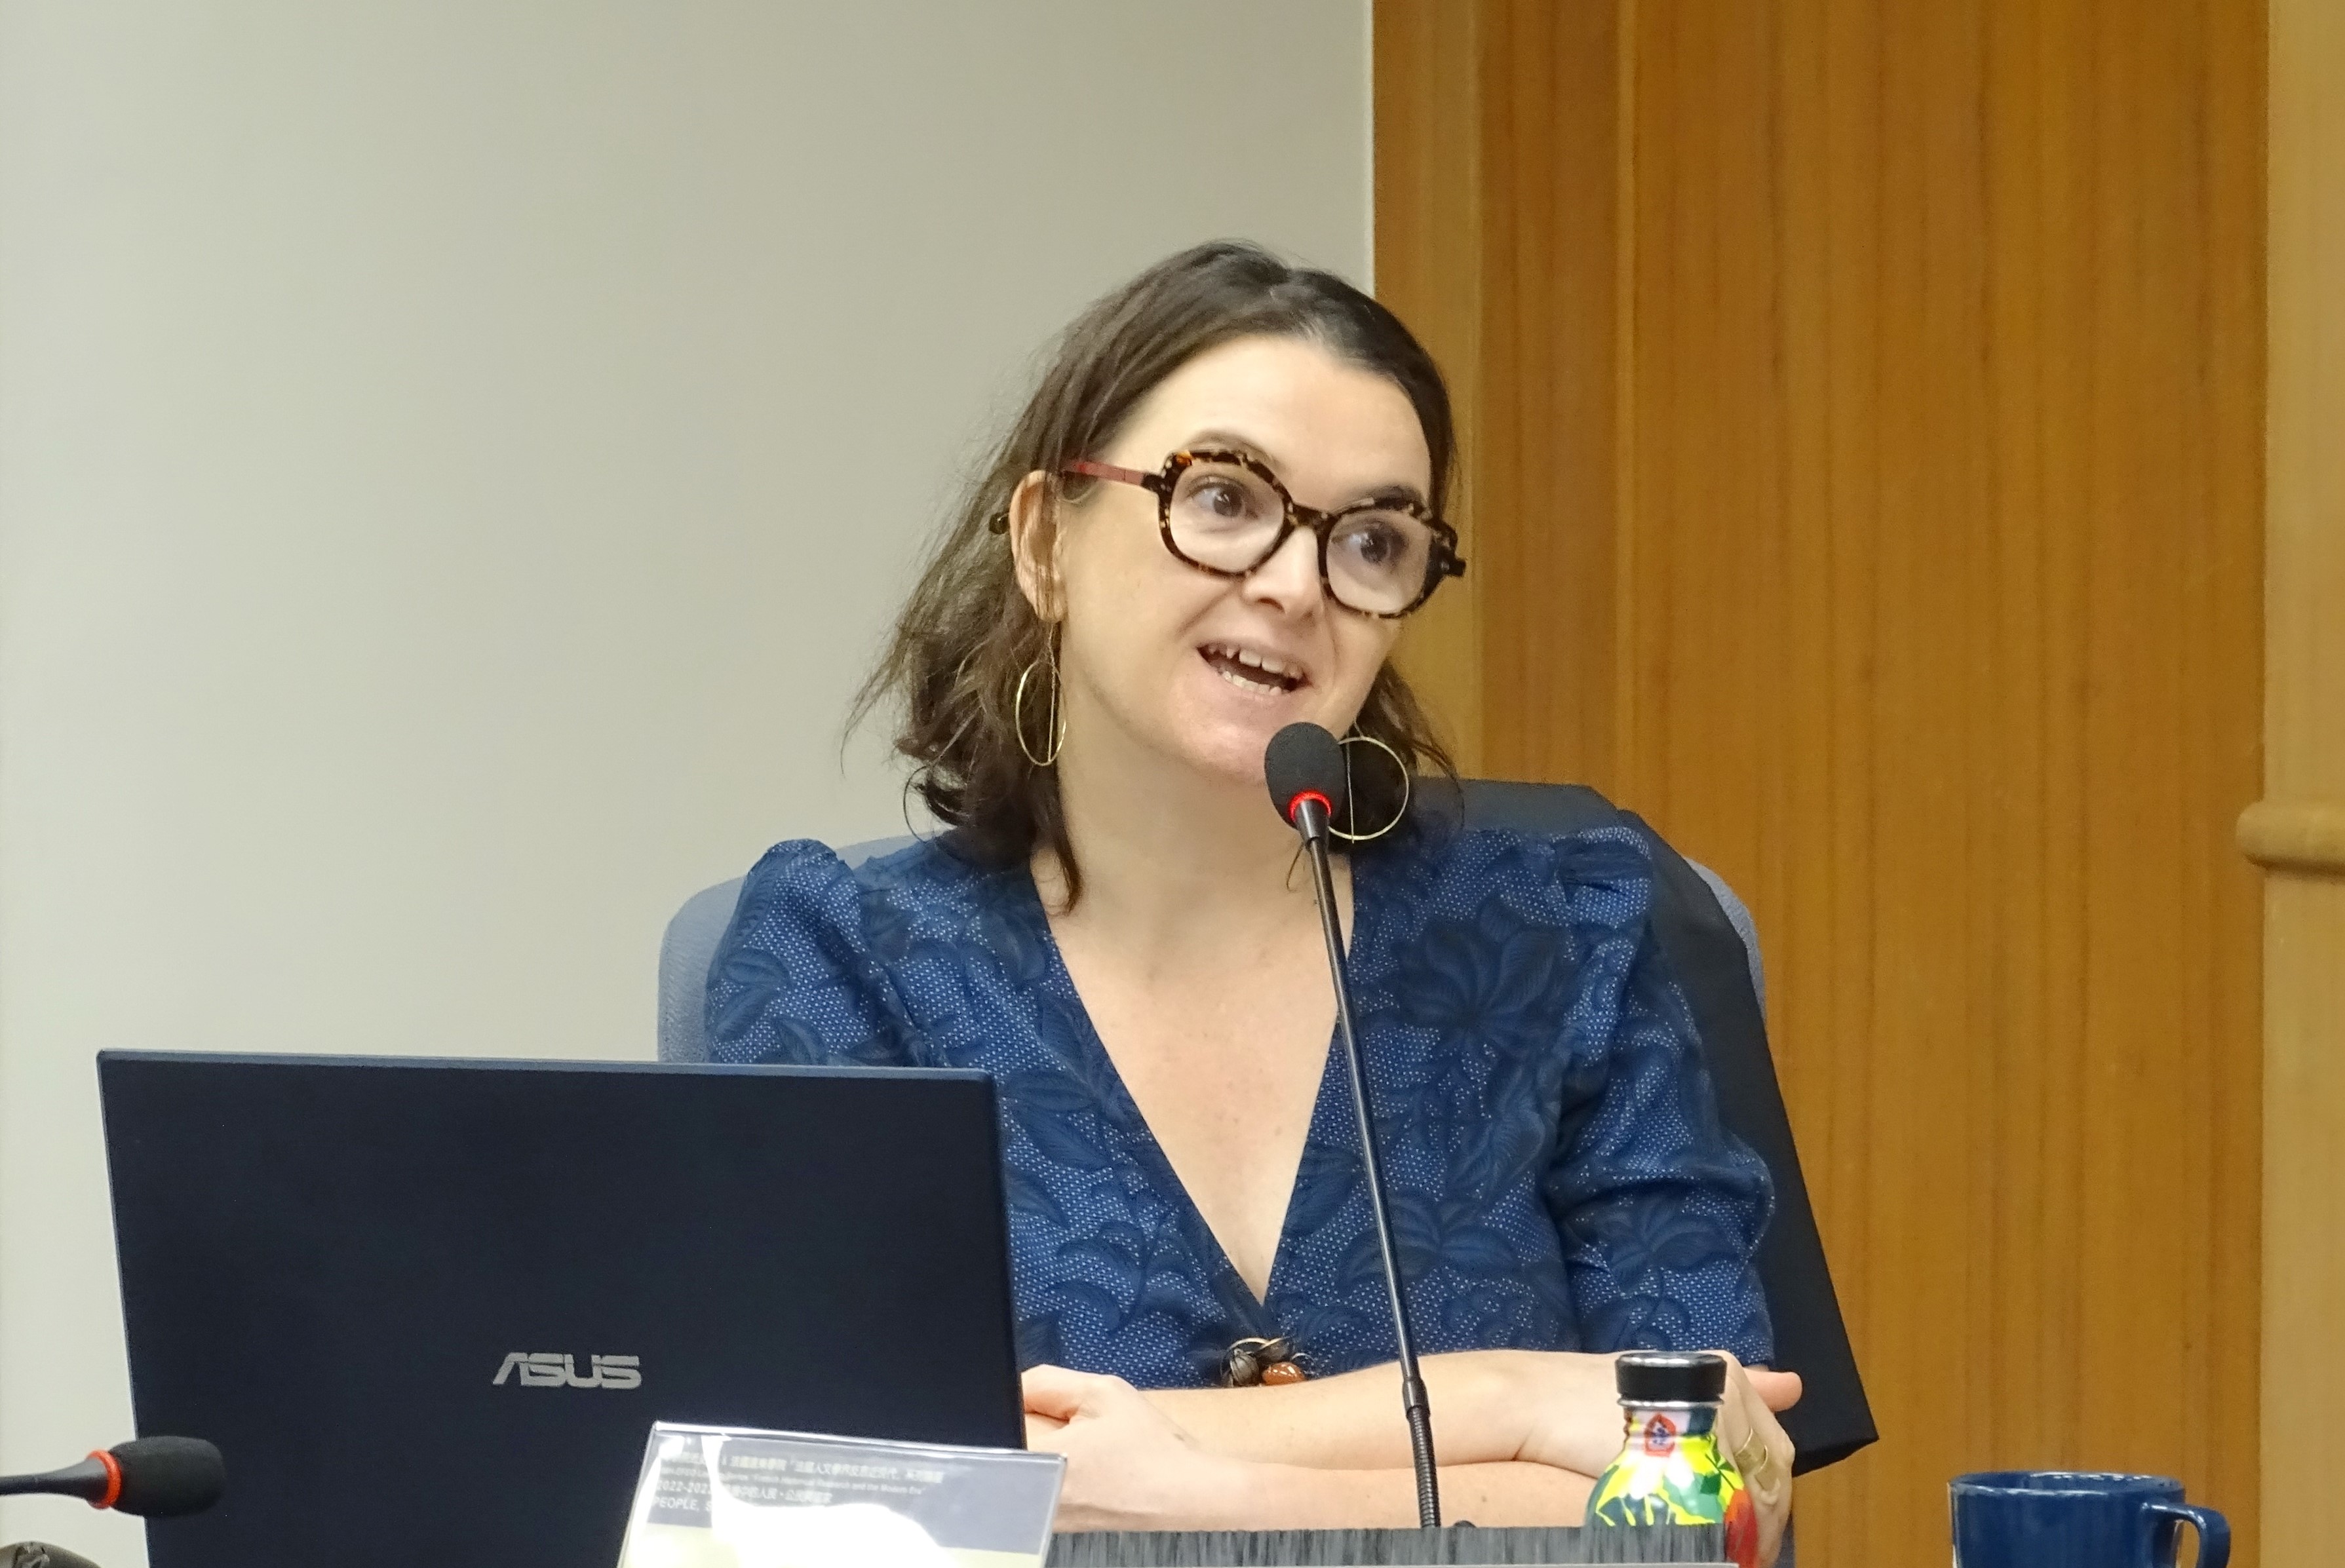 Marie-Paule Hille教授演講「The Role of Muslims in the Economic History of Northwest China (19th-20th Century): The Case of Xidaotang and its Trading Establishment Tian Xing Long」紀要